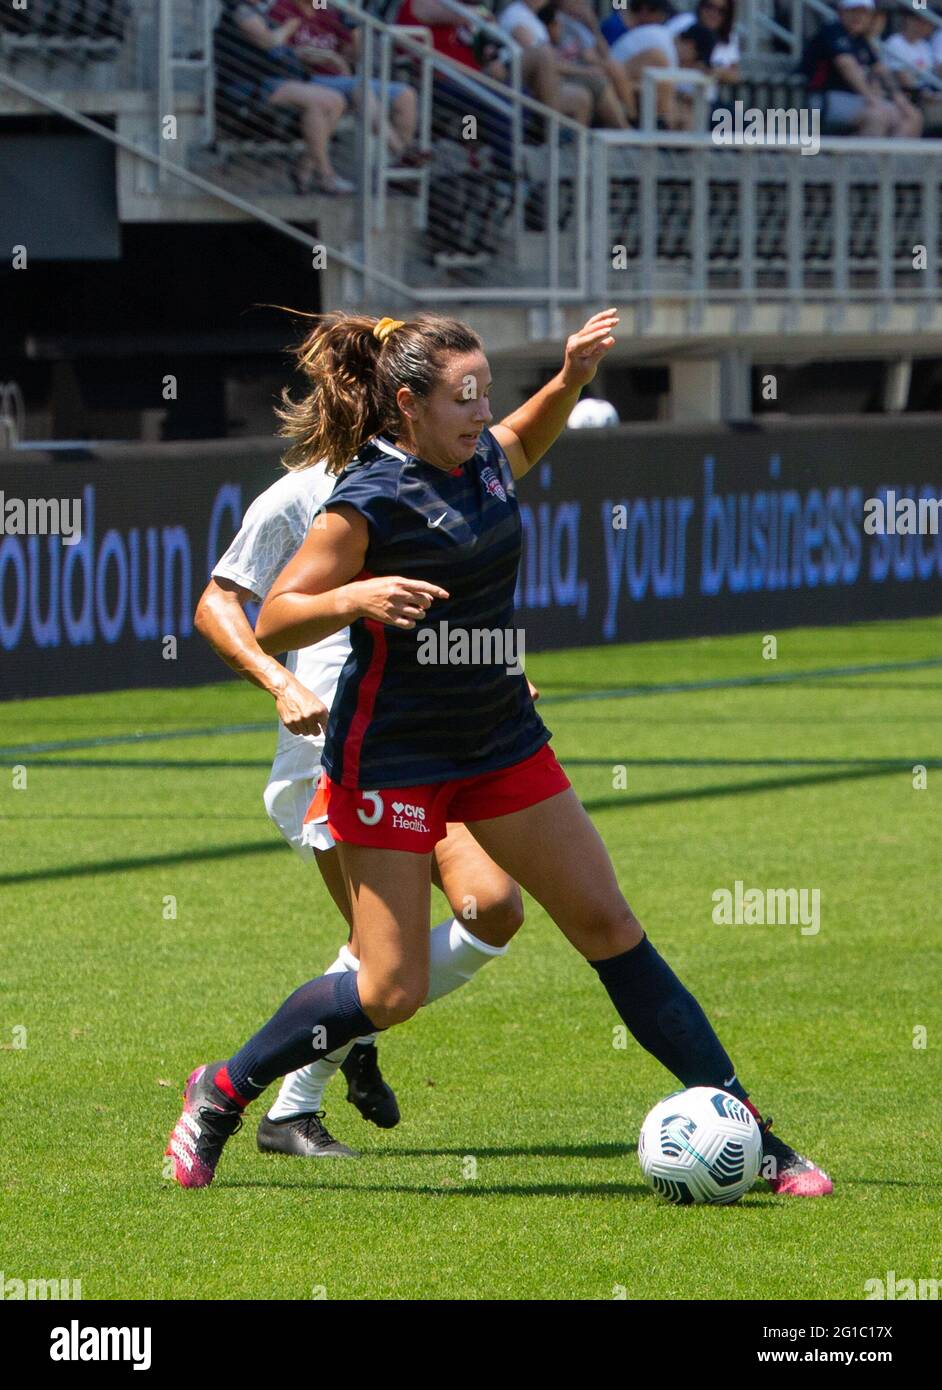 Washington D.C, United States. 06th June, 2021. Sam Staab #3 controling the ball during the Washington Spirit's game against Orlando Pride at Audi Field in Washington, DC NO COMMERCIAL USAGE. Credit: SPP Sport Press Photo. /Alamy Live News Stock Photo